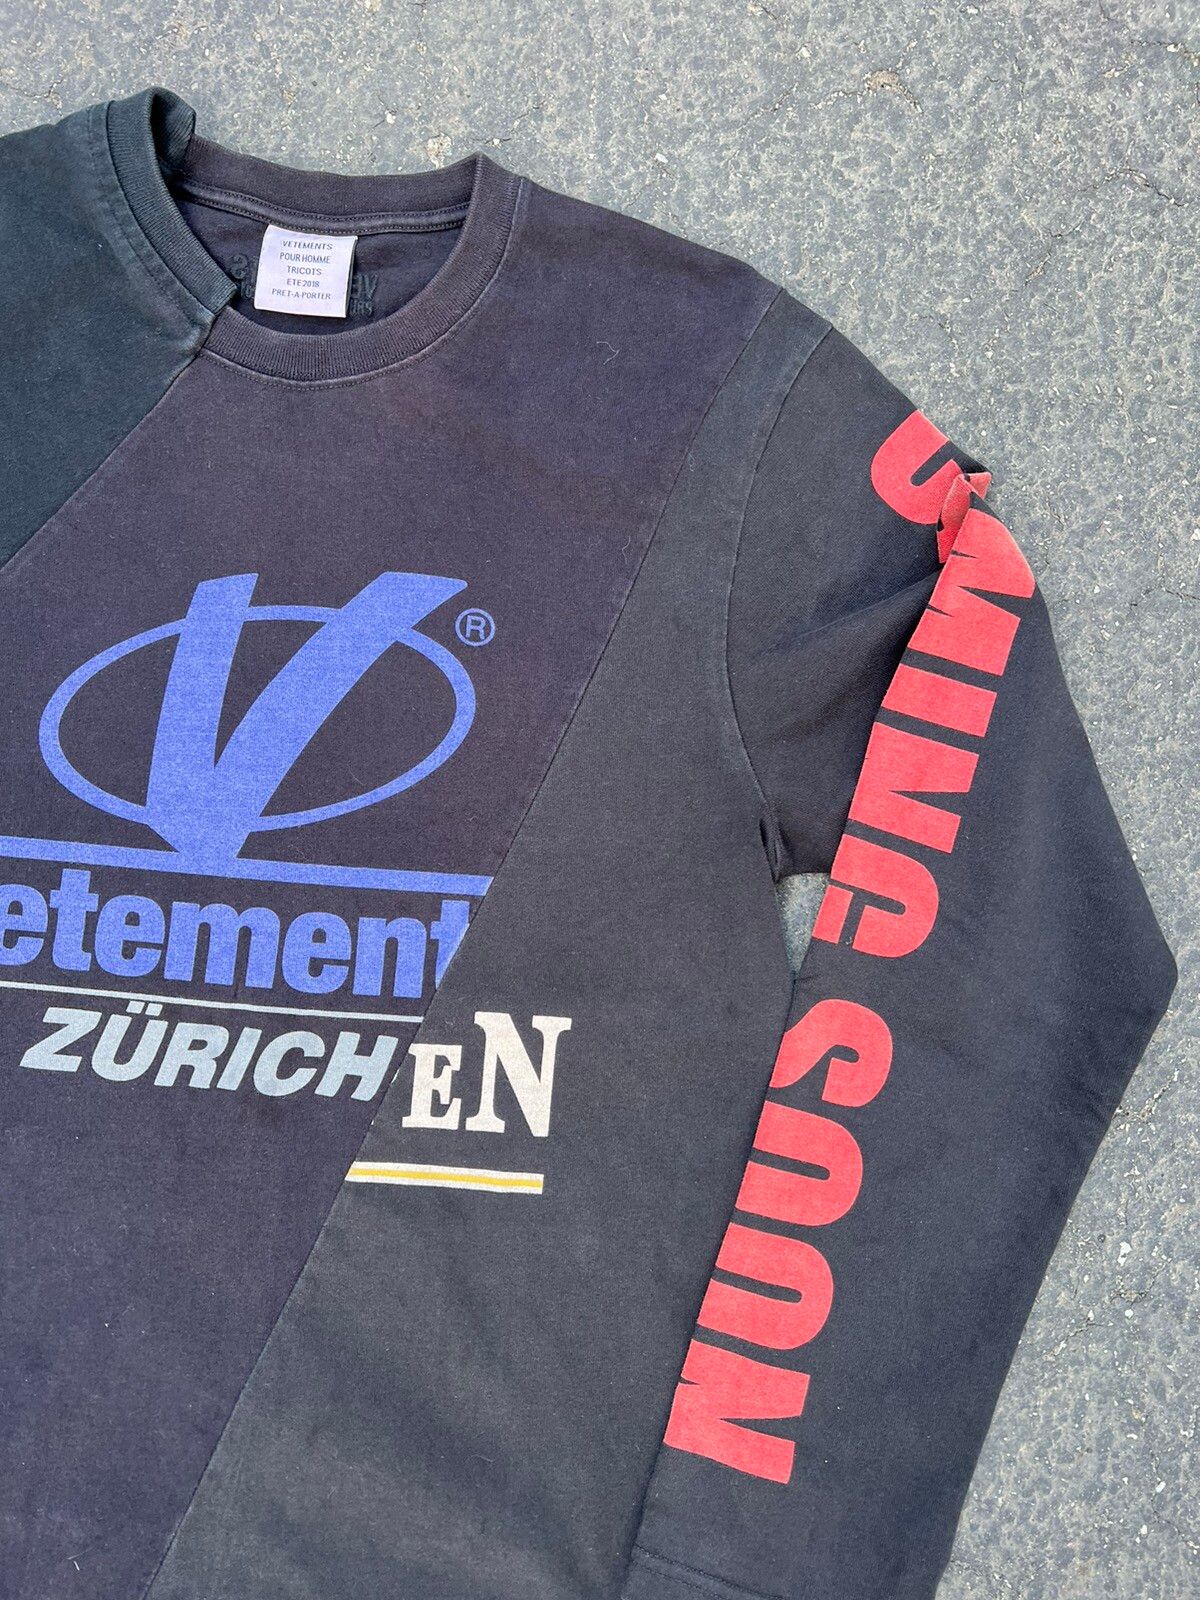 Vetements Vetements SS18 Zurich Reconstructed Long Sleeve Size US S / EU 44-46 / 1 - 2 Preview